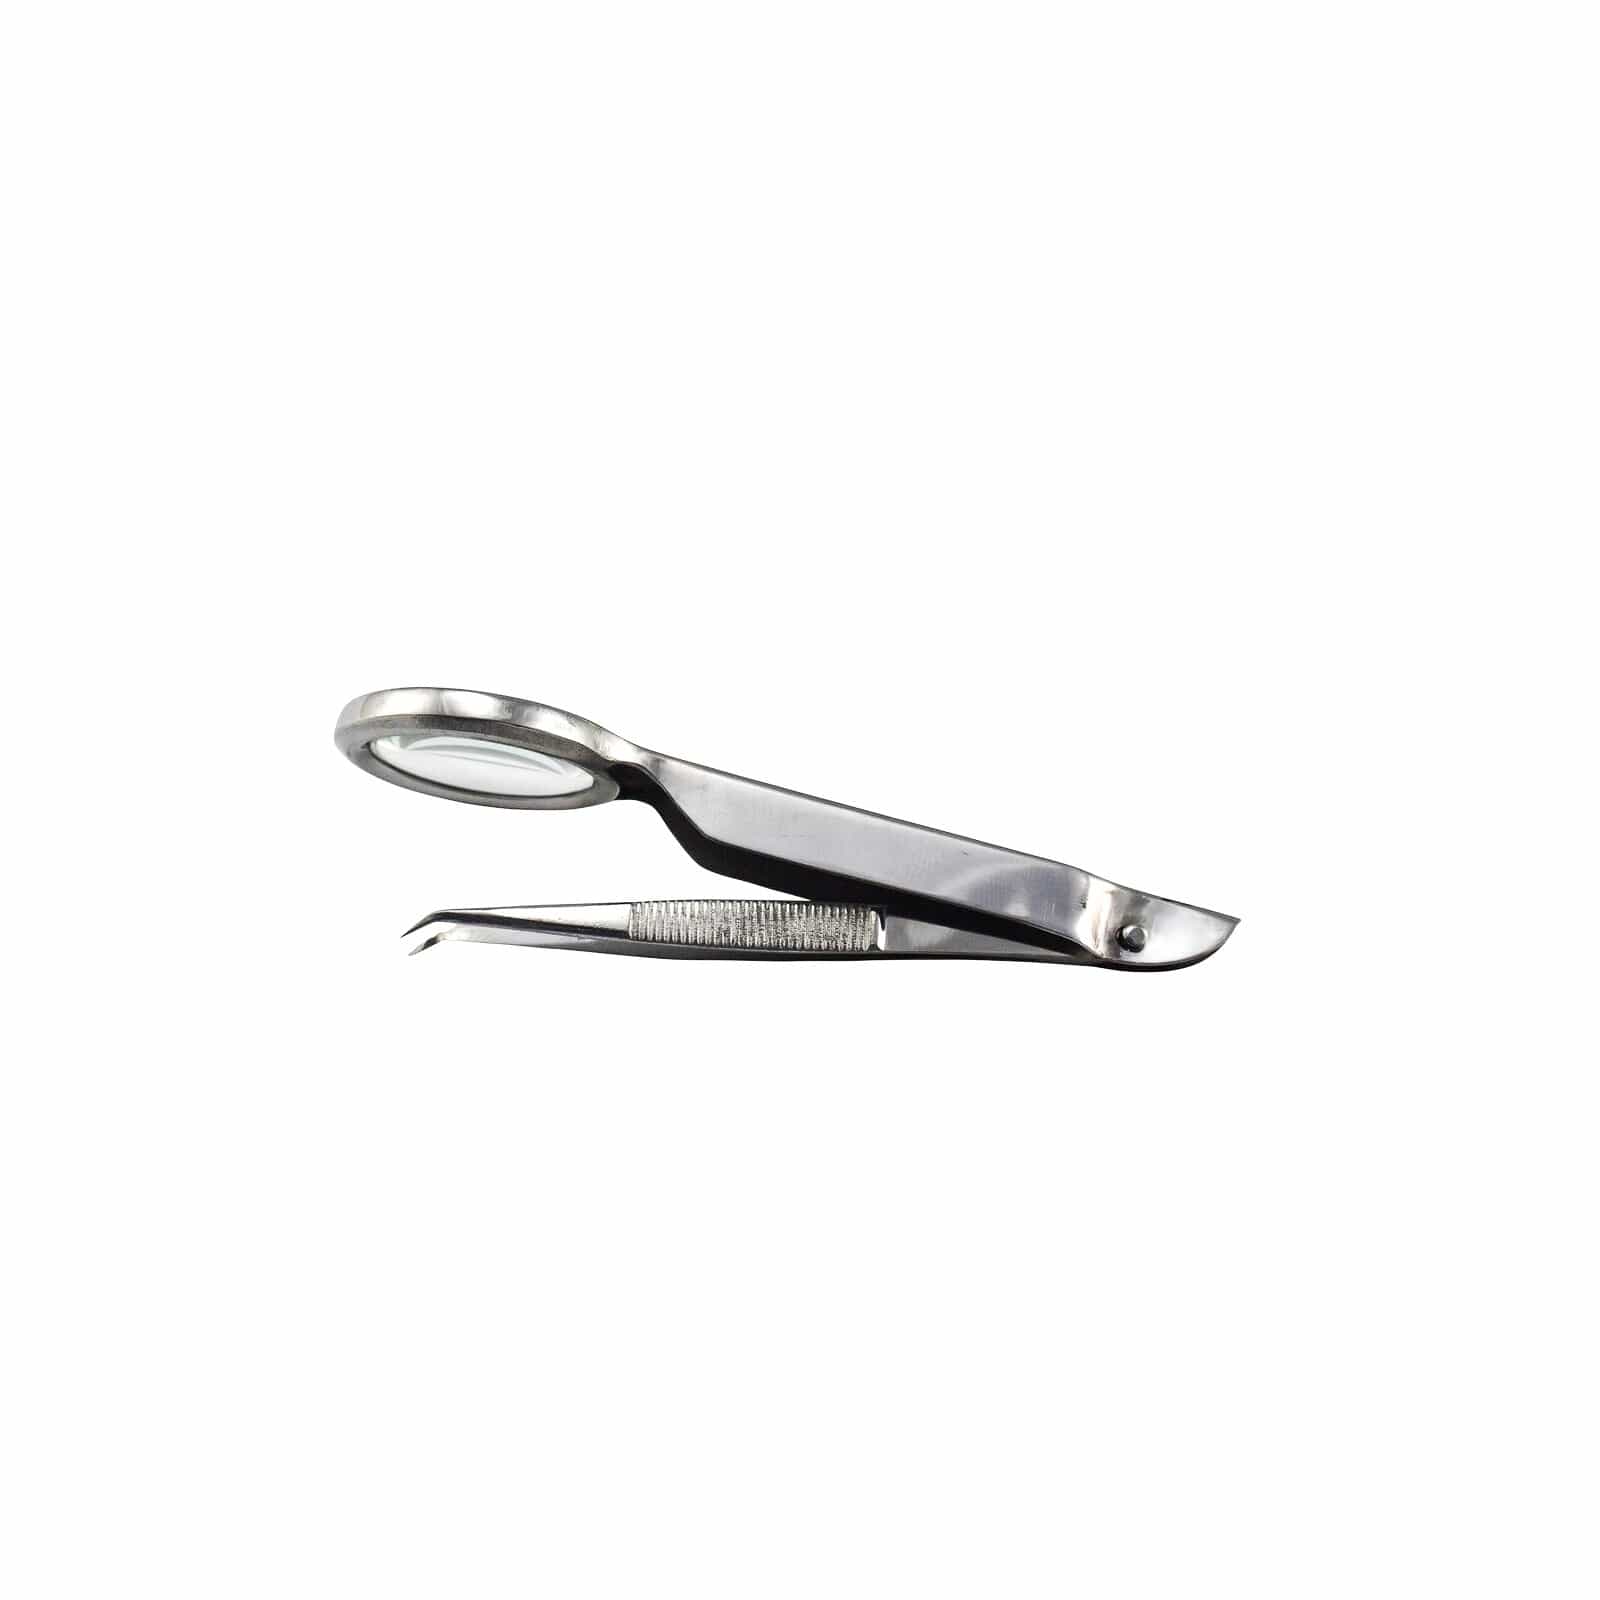 Sayco Surgical Instruments Sayco Forceps With Magnifier